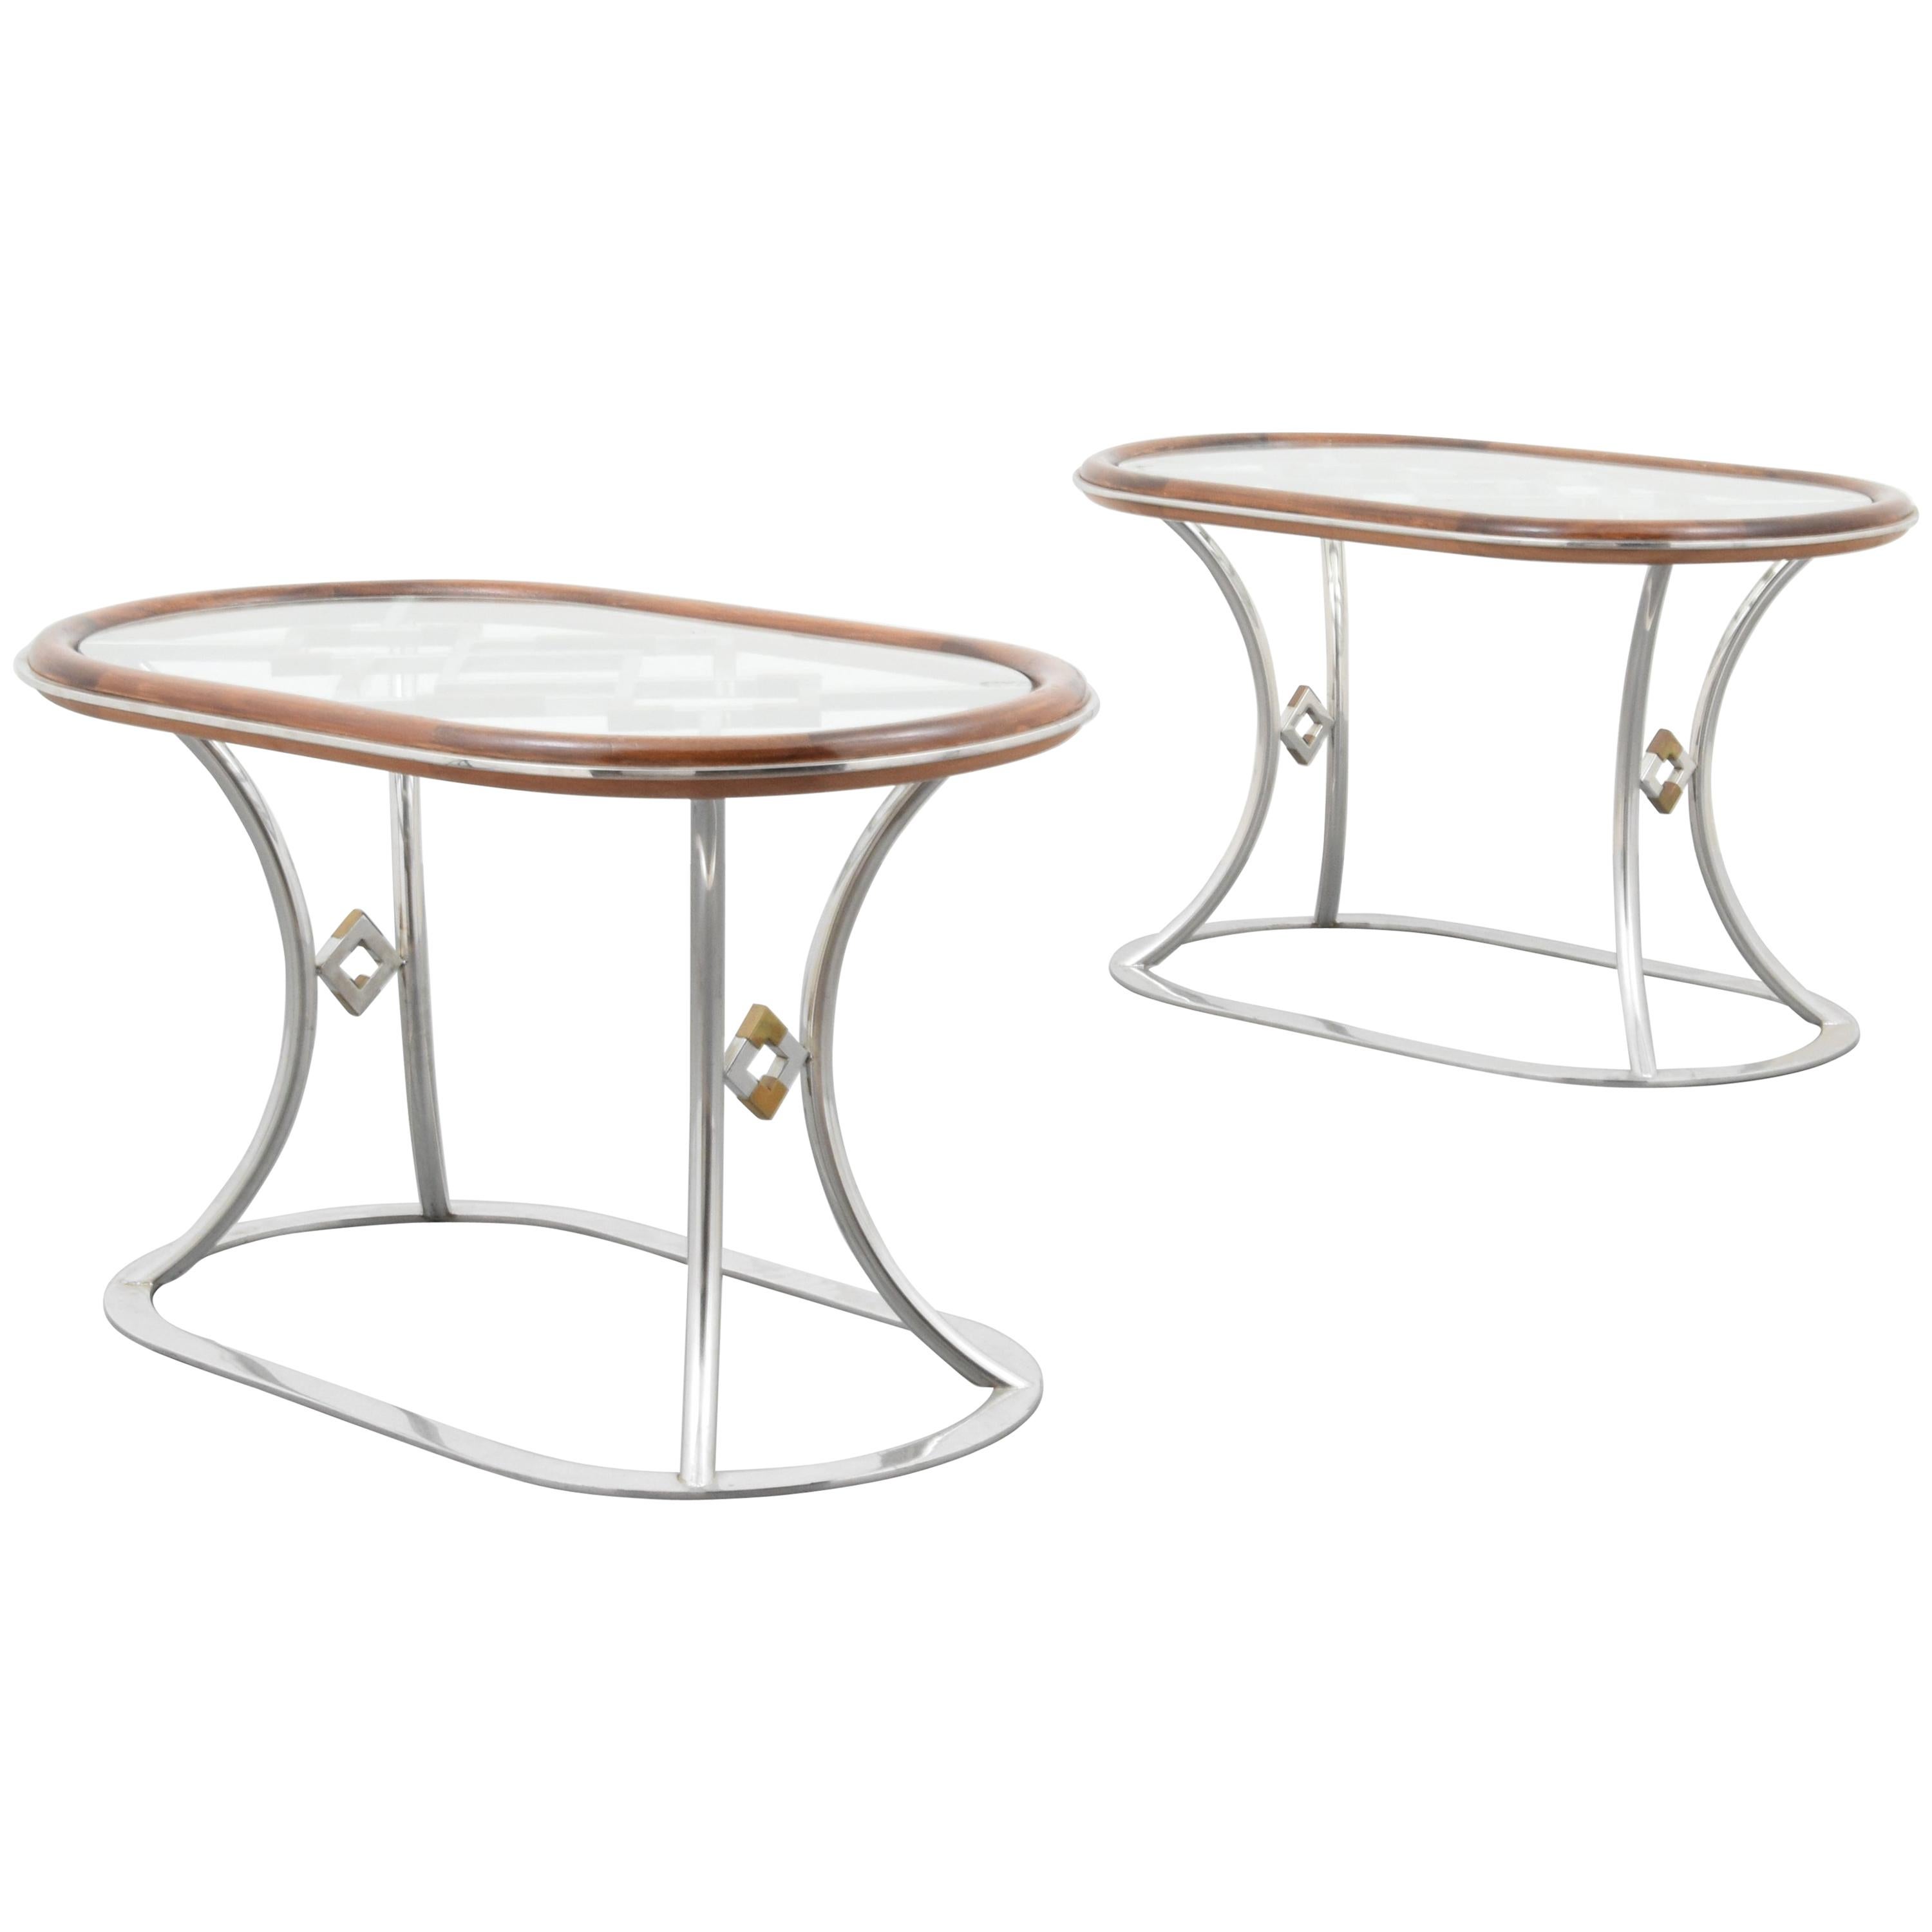 Stylish Steel and Brass Side Tables by Alain Delon for Maison Jansen